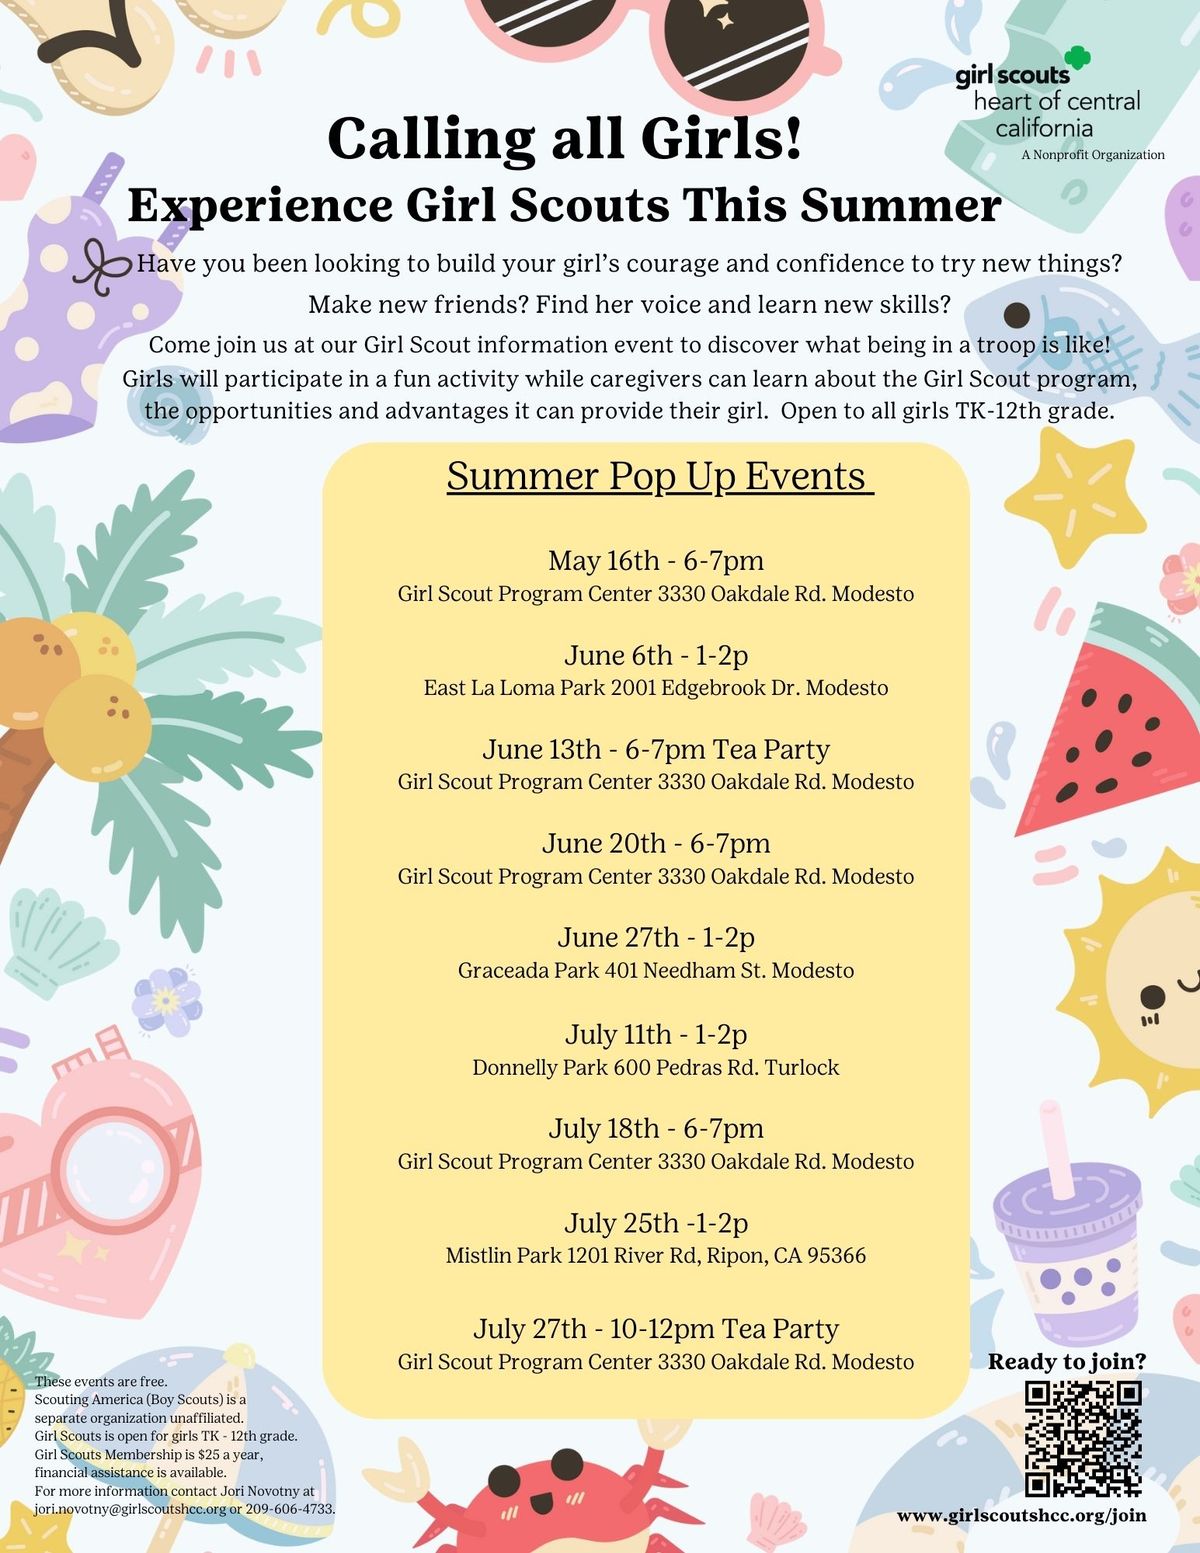 Girl Scouts at the Park - Mistlin Park Ripon